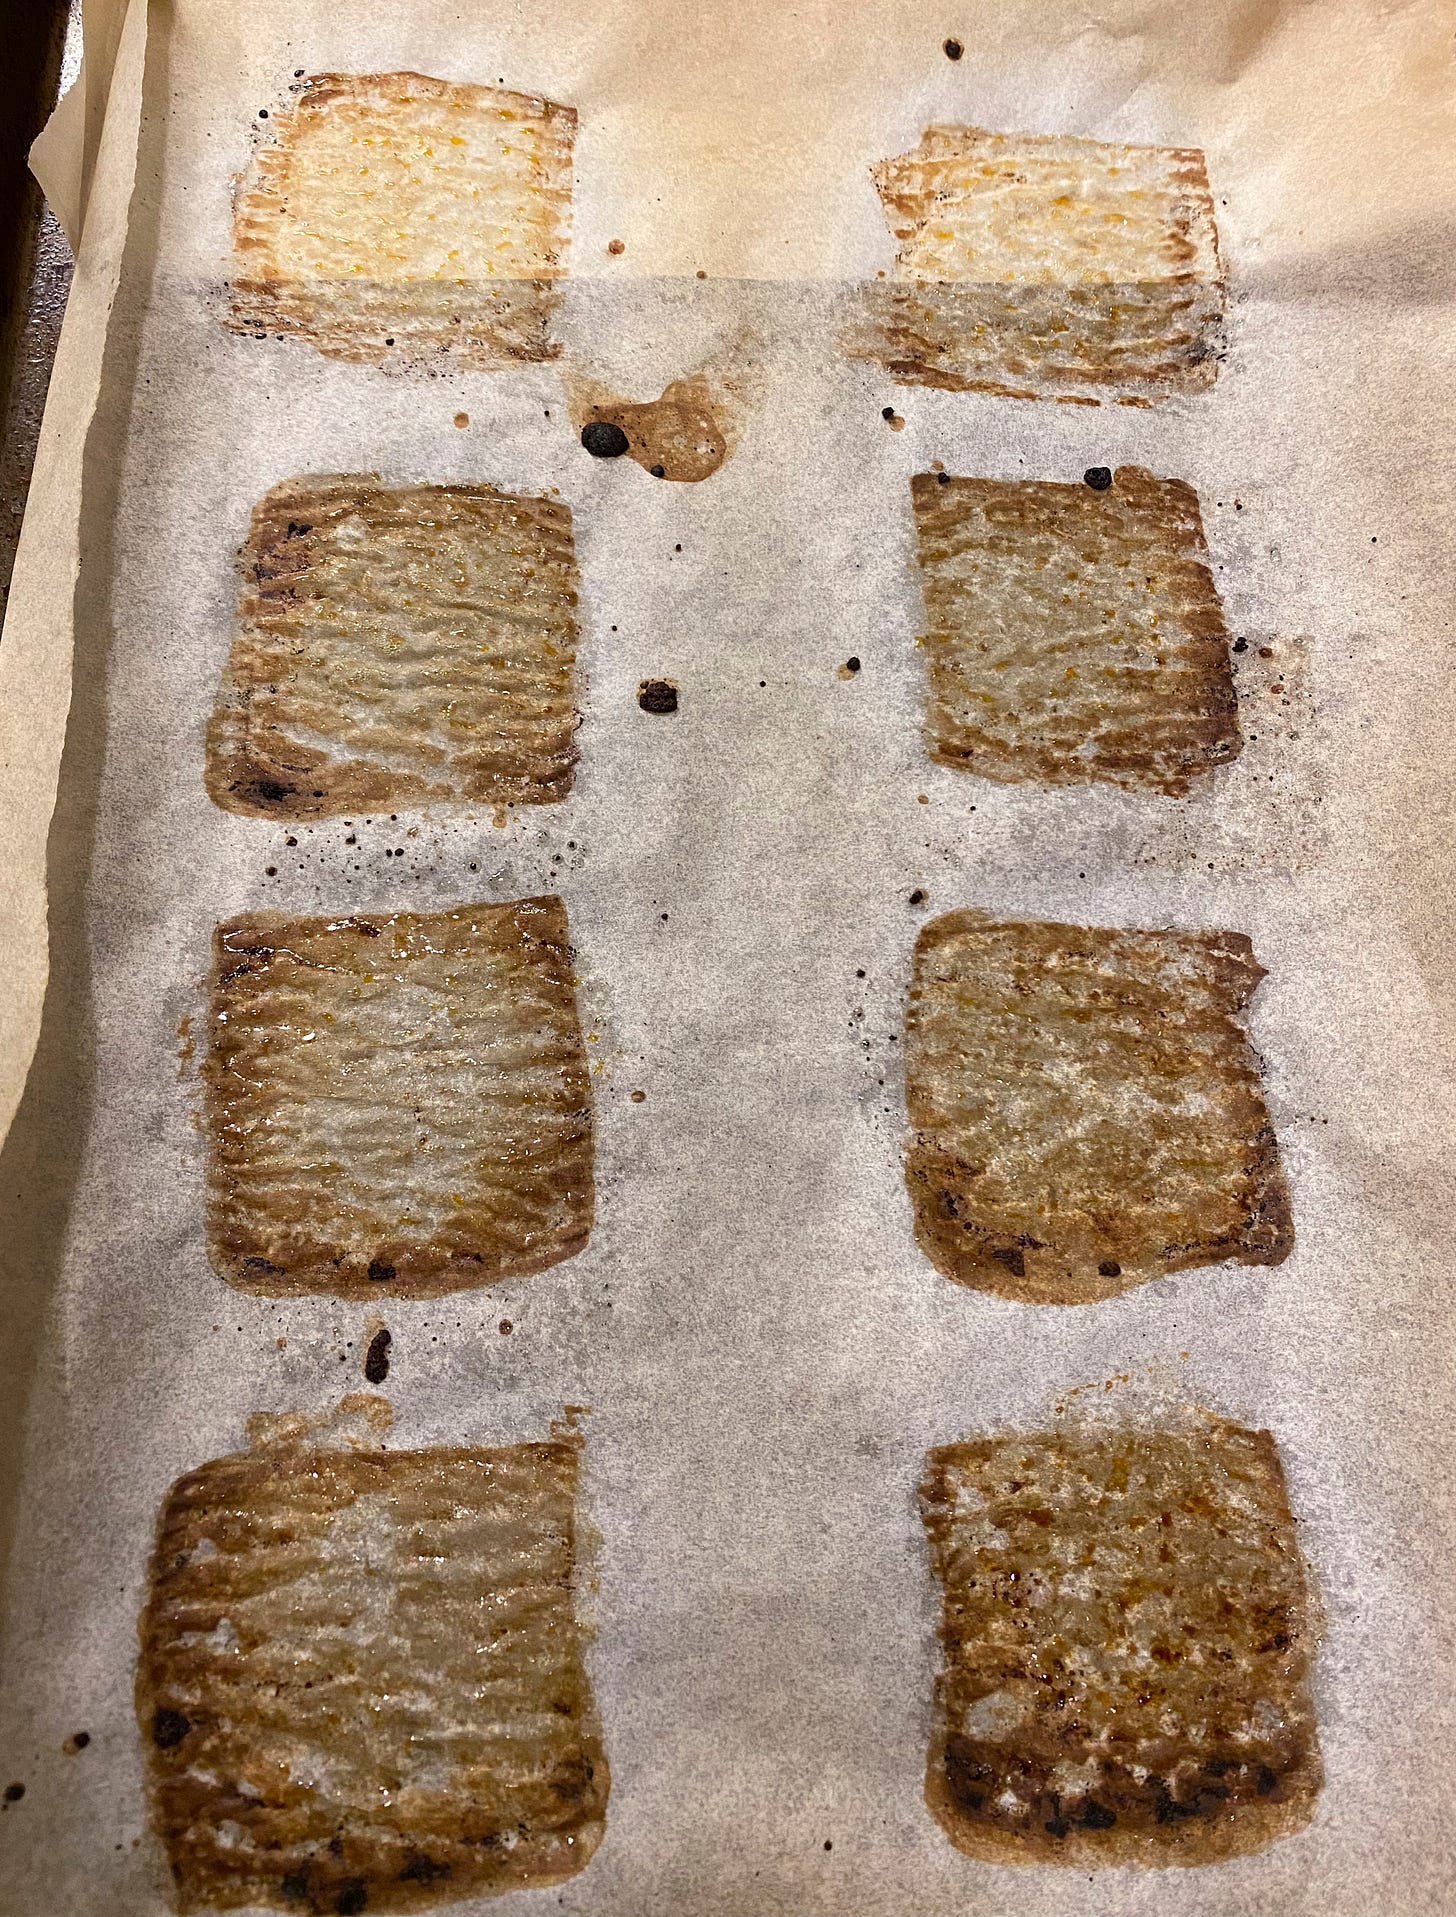 A piece of parchment paper stained dark in squares from baking the tofu. There are two columns of four squares each, and splashes of burned marinade around and between them.